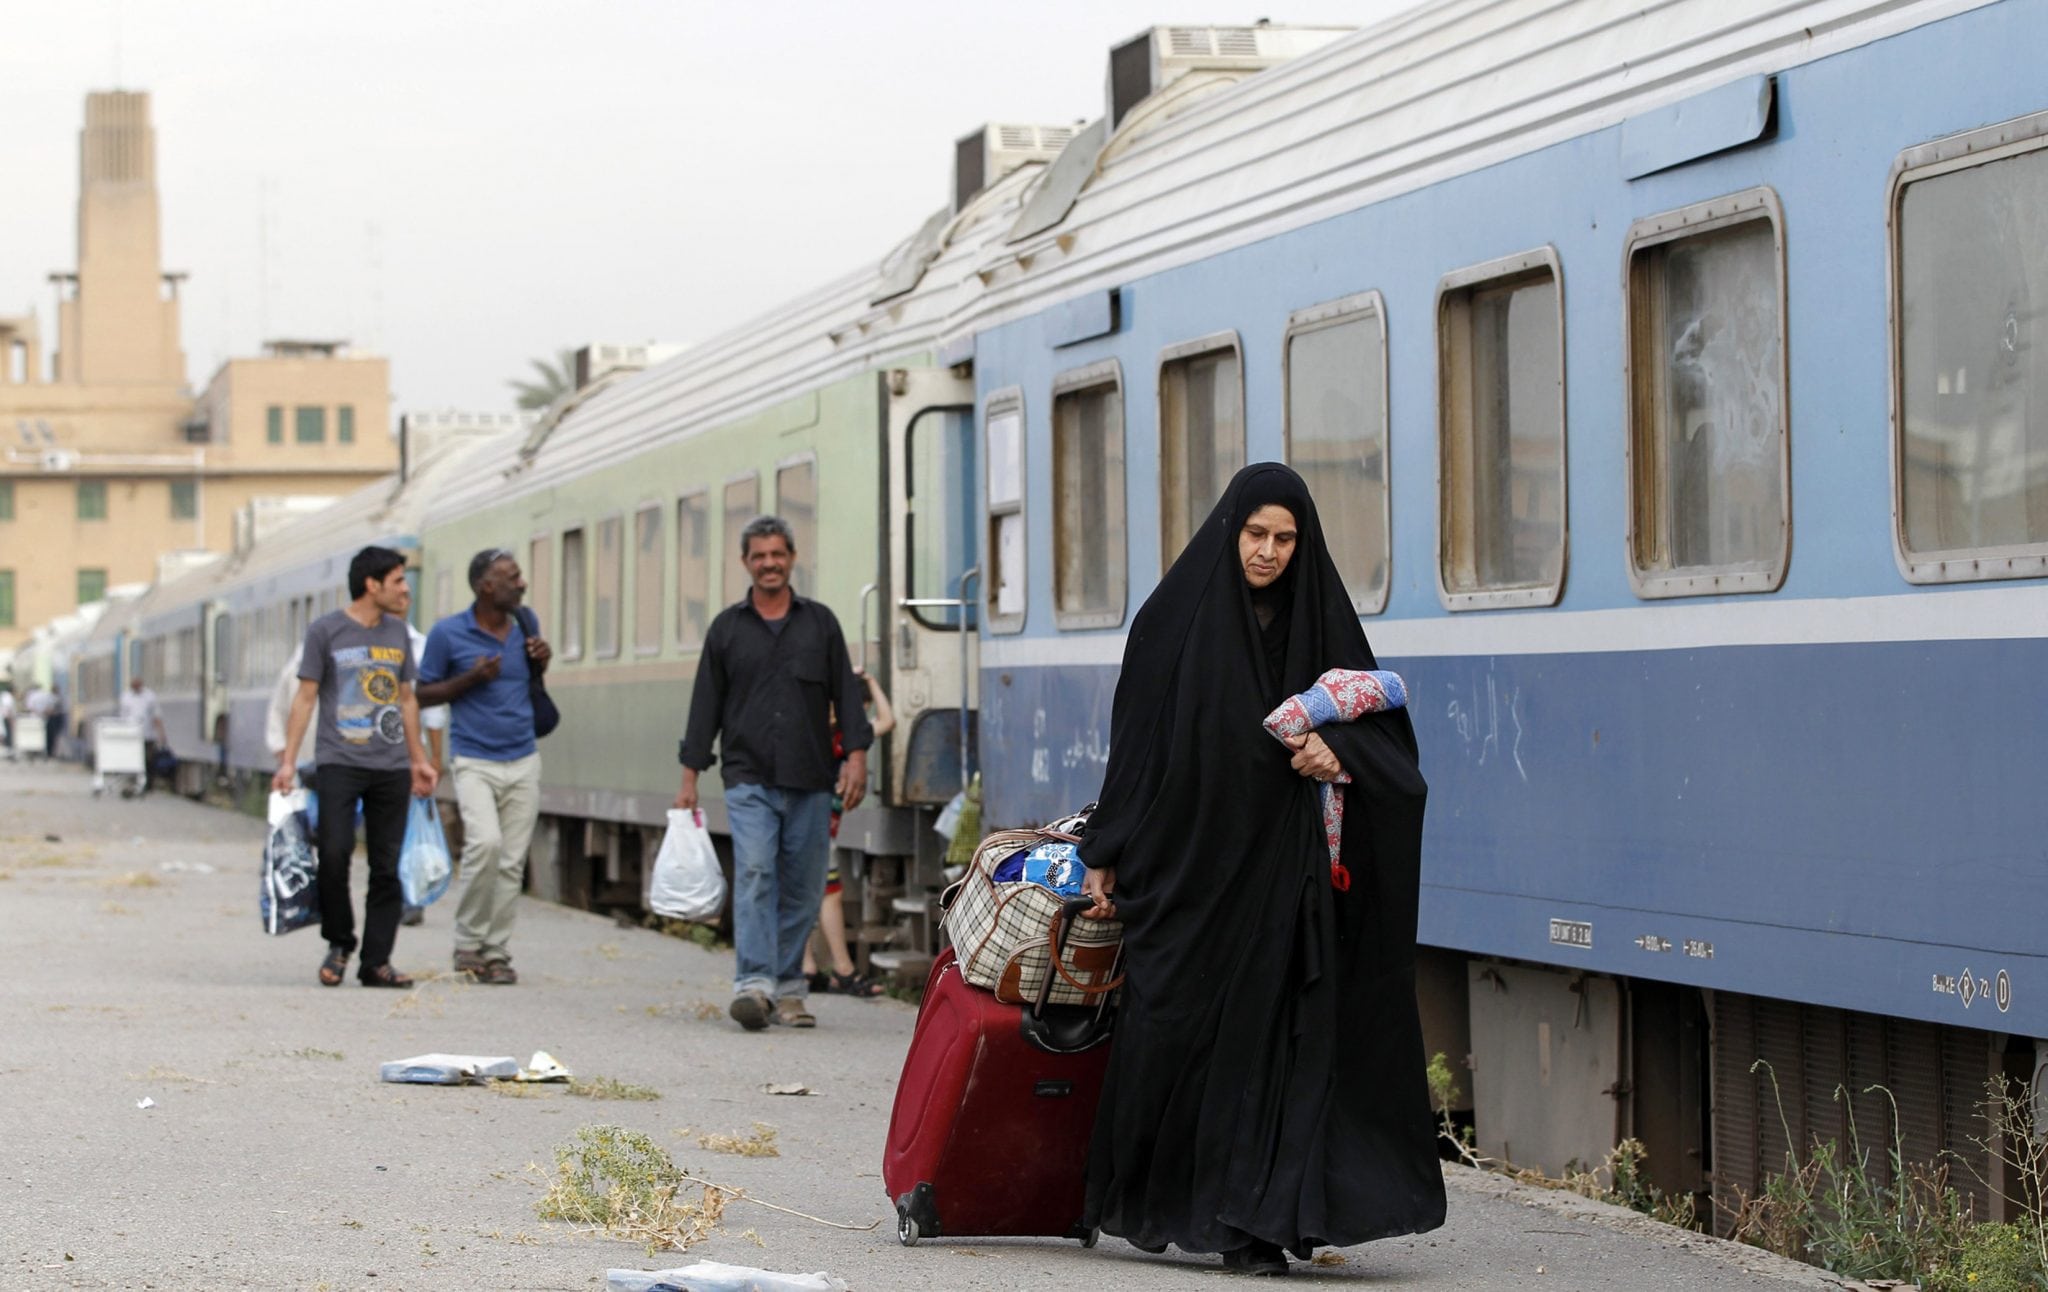 A passenger walks beside a train in a train station in Baghdad May 6, 2013. Source: Reuters